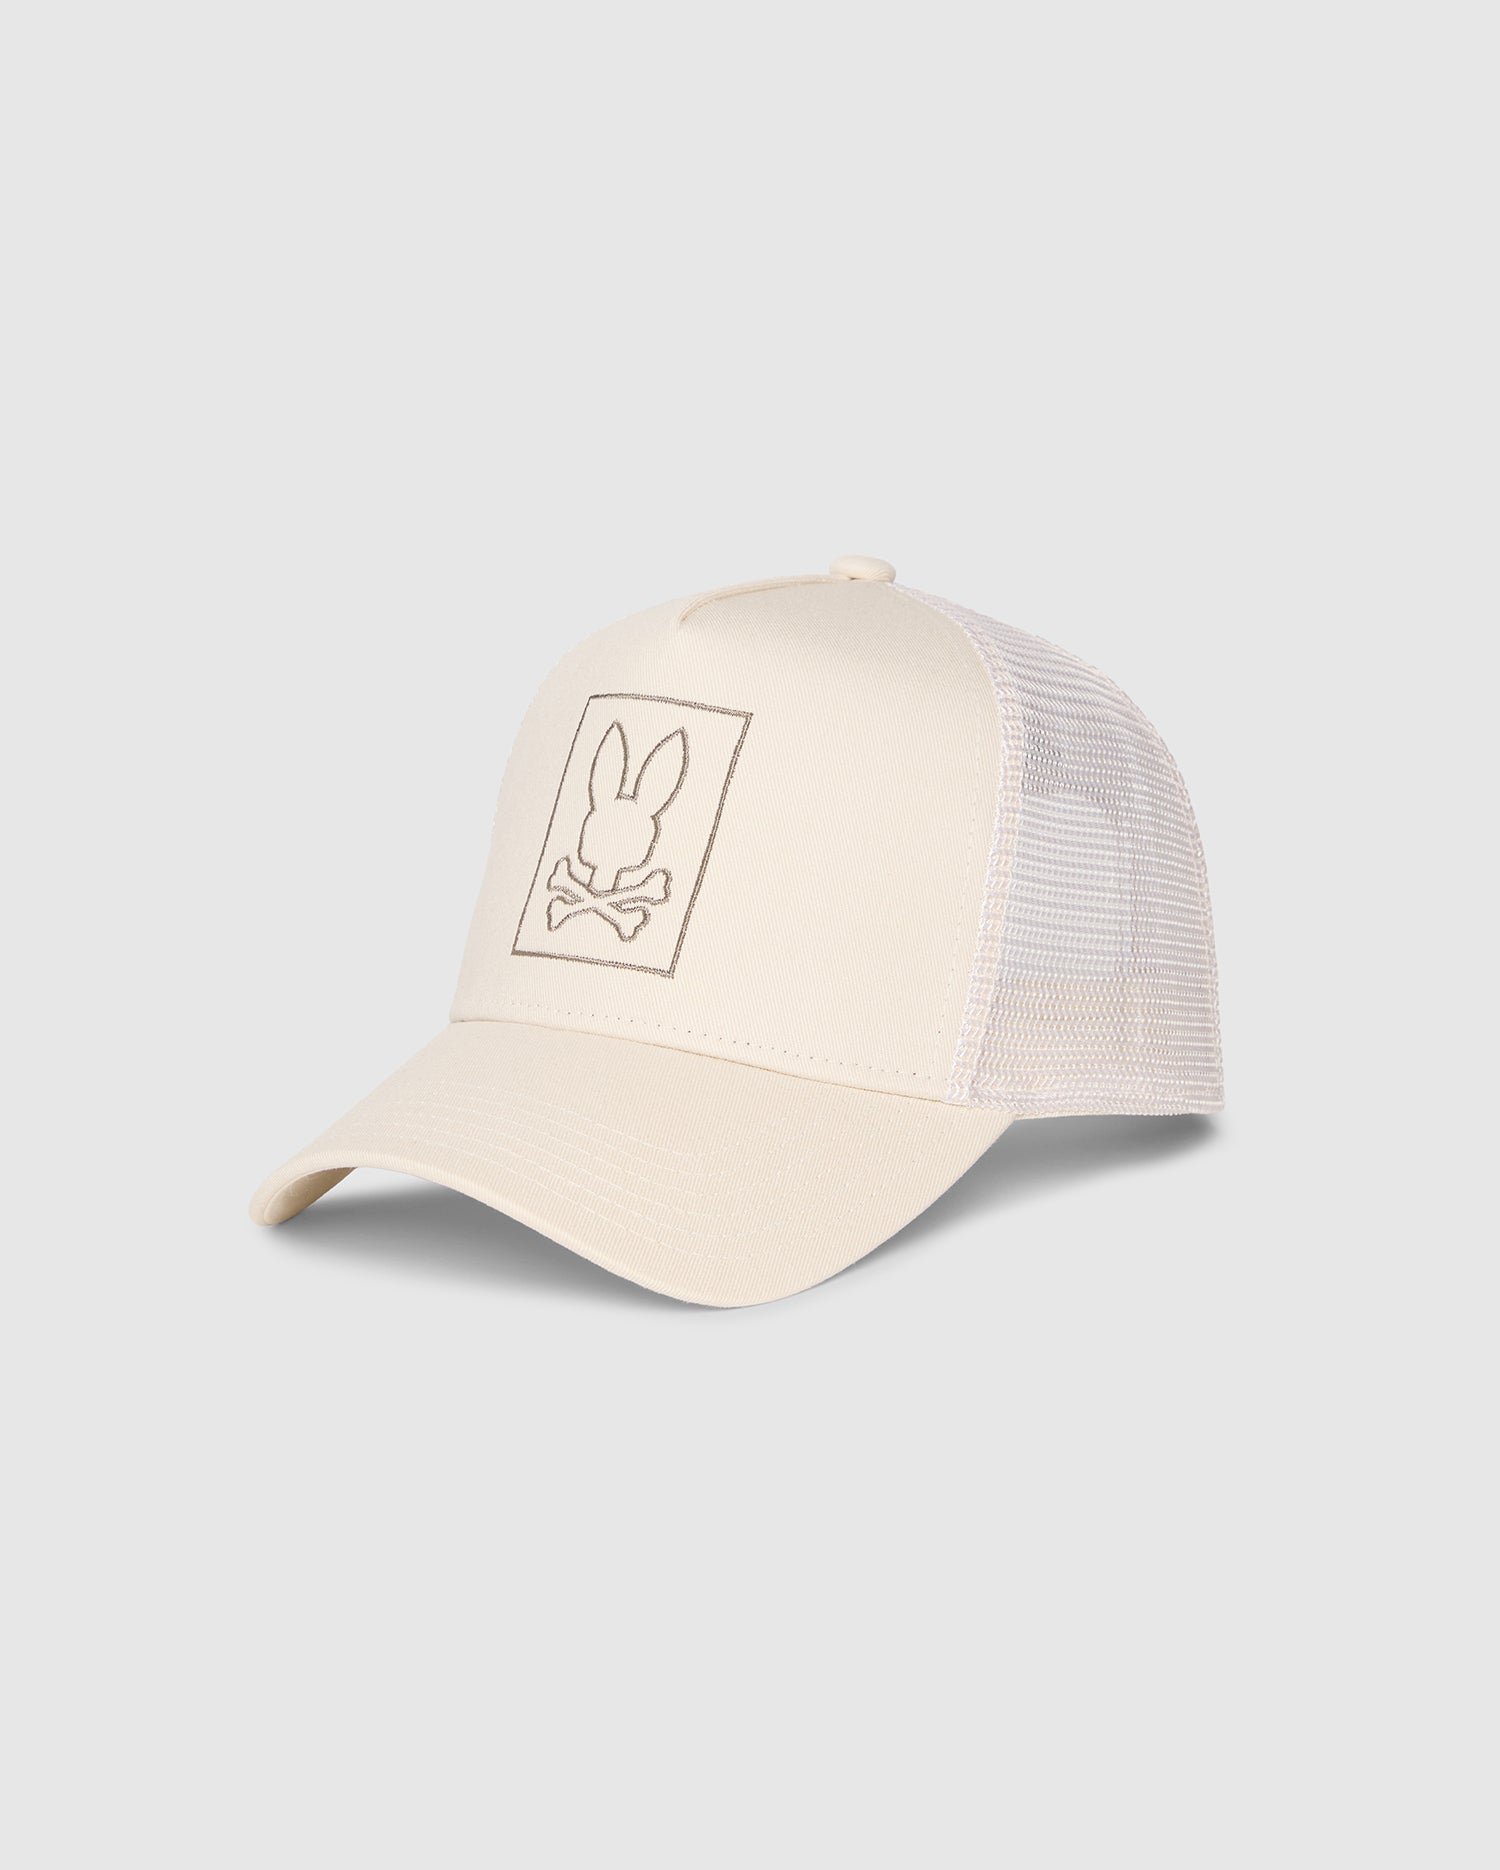 The Psycho Bunny MENS LIVINGSTON TRUCKER CAP - B6A401B200, in beige, features an adjustable snapback and mesh back. The solid front showcases a white rabbit head and crossbones logo inside a rectangle on the front panel, with a slightly curved brim.